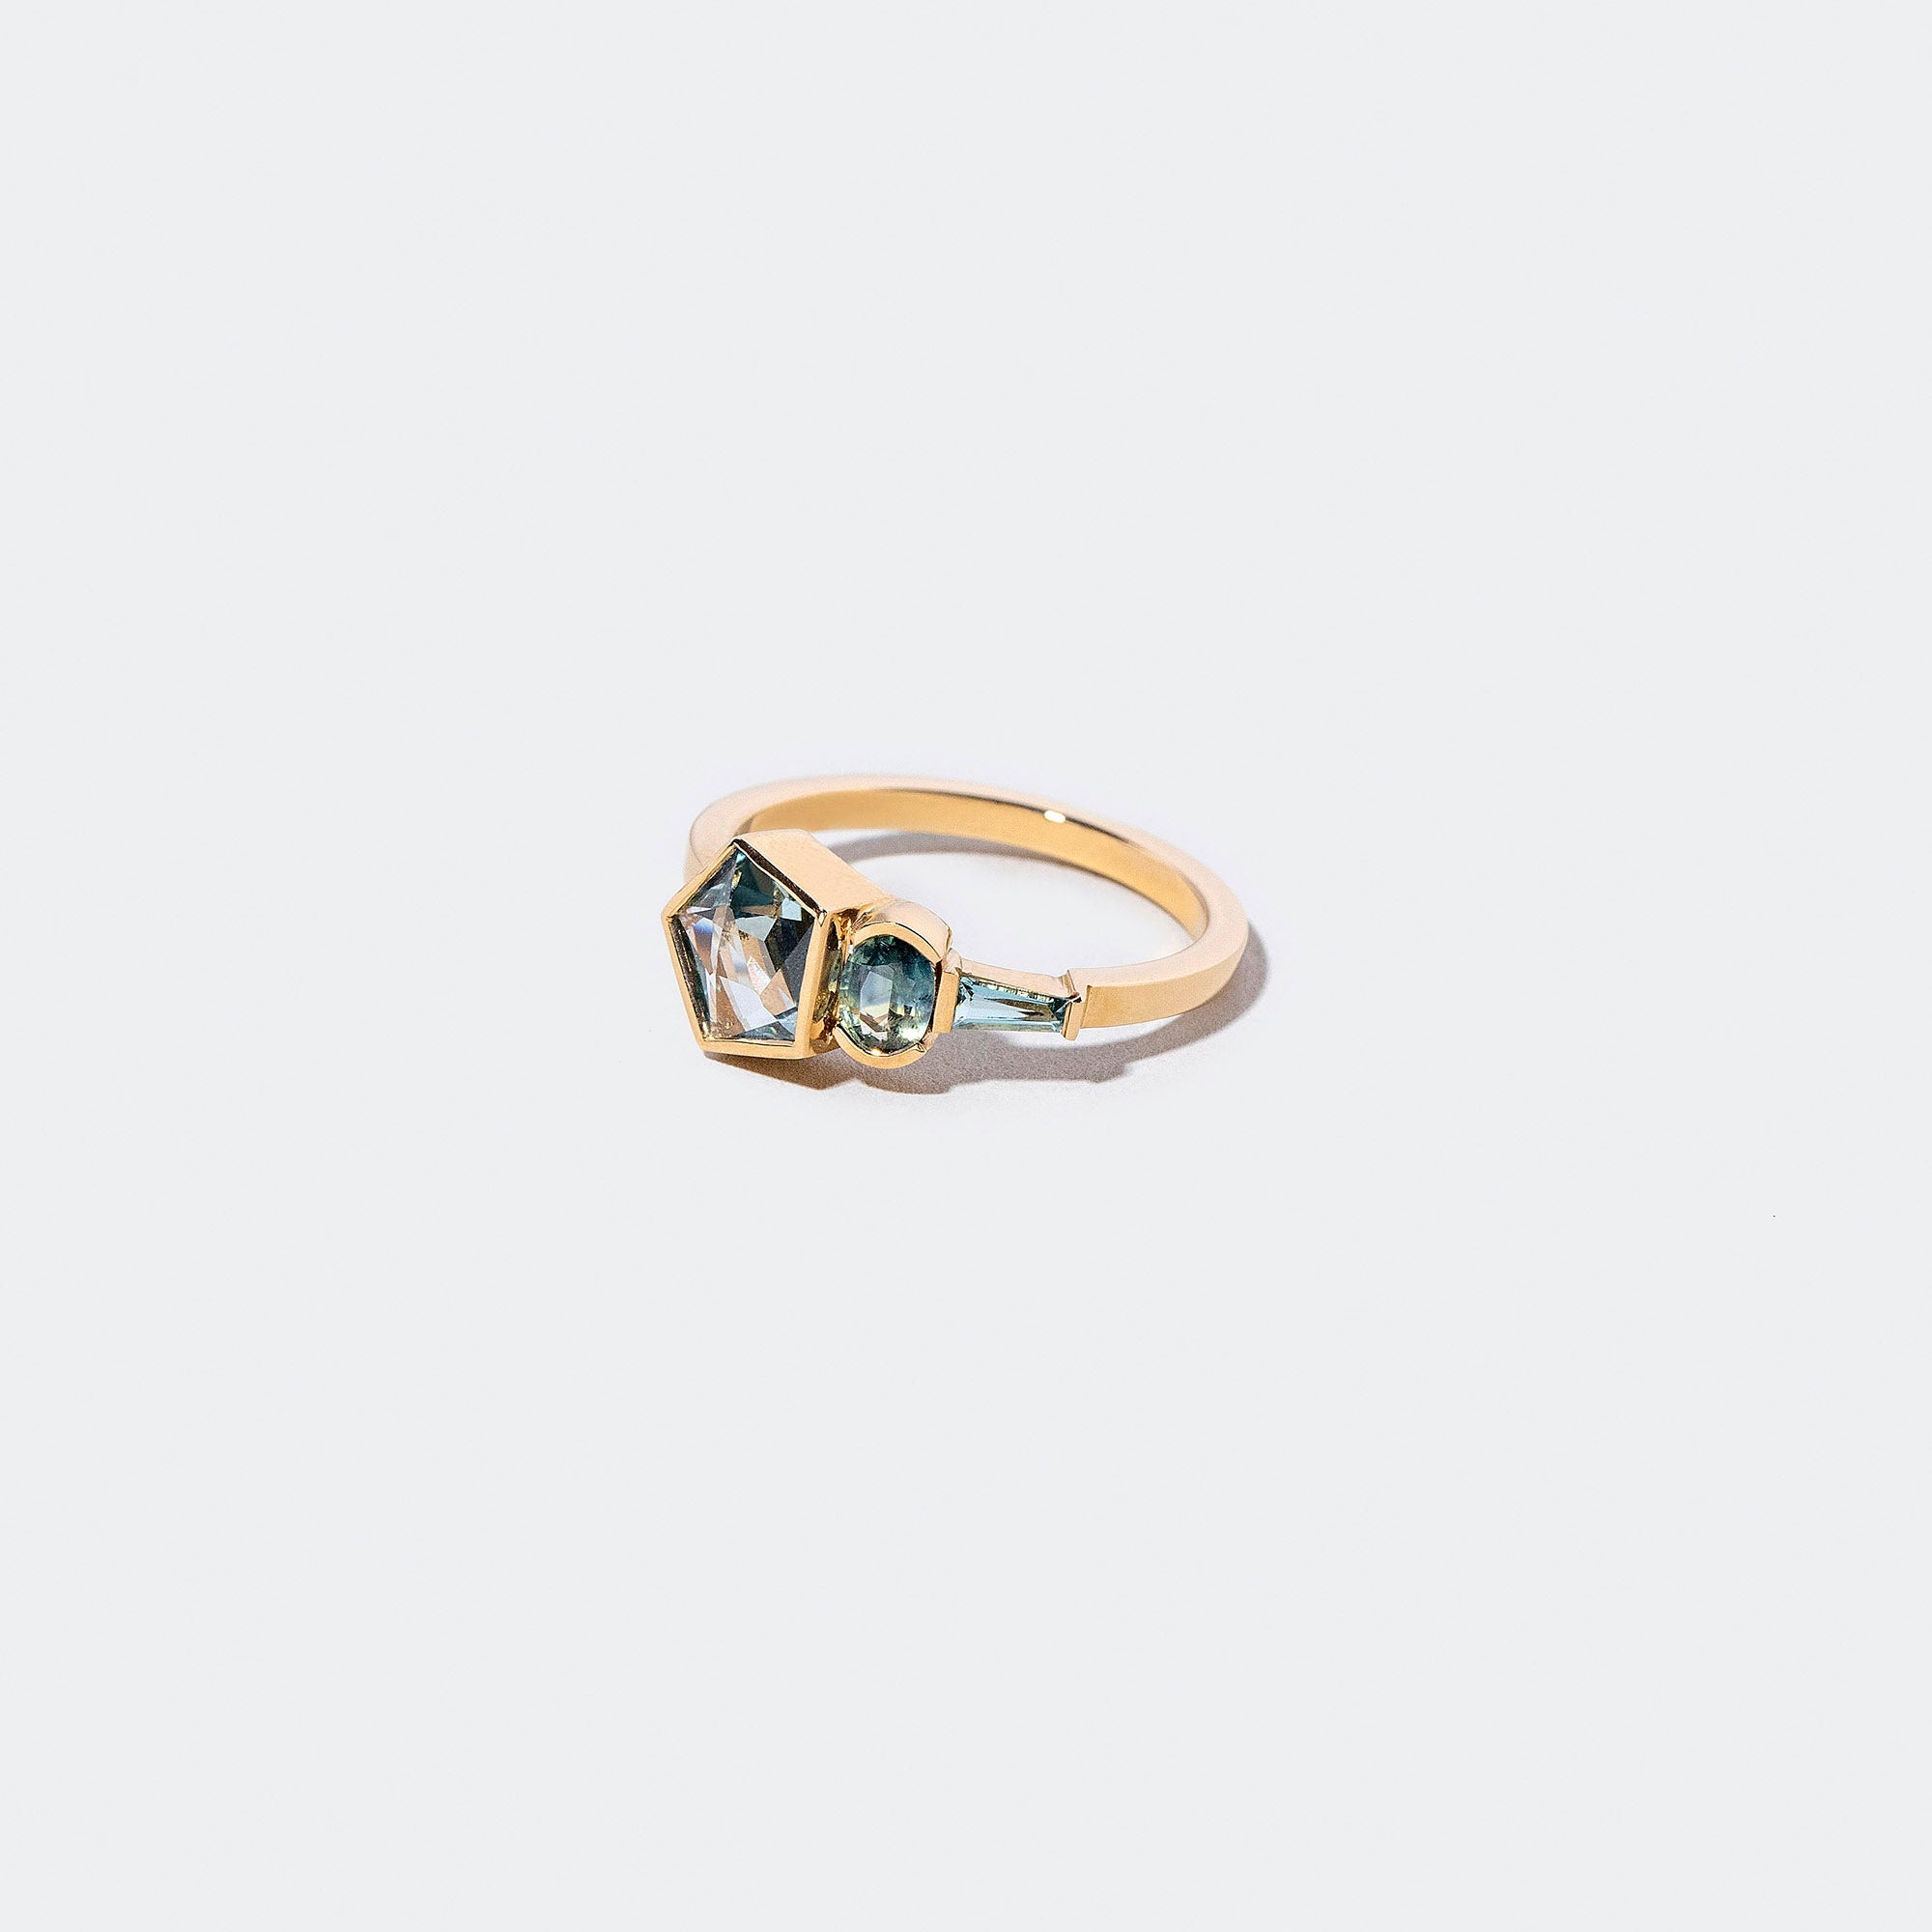 product_details:: Syncretism Ring on light color background.